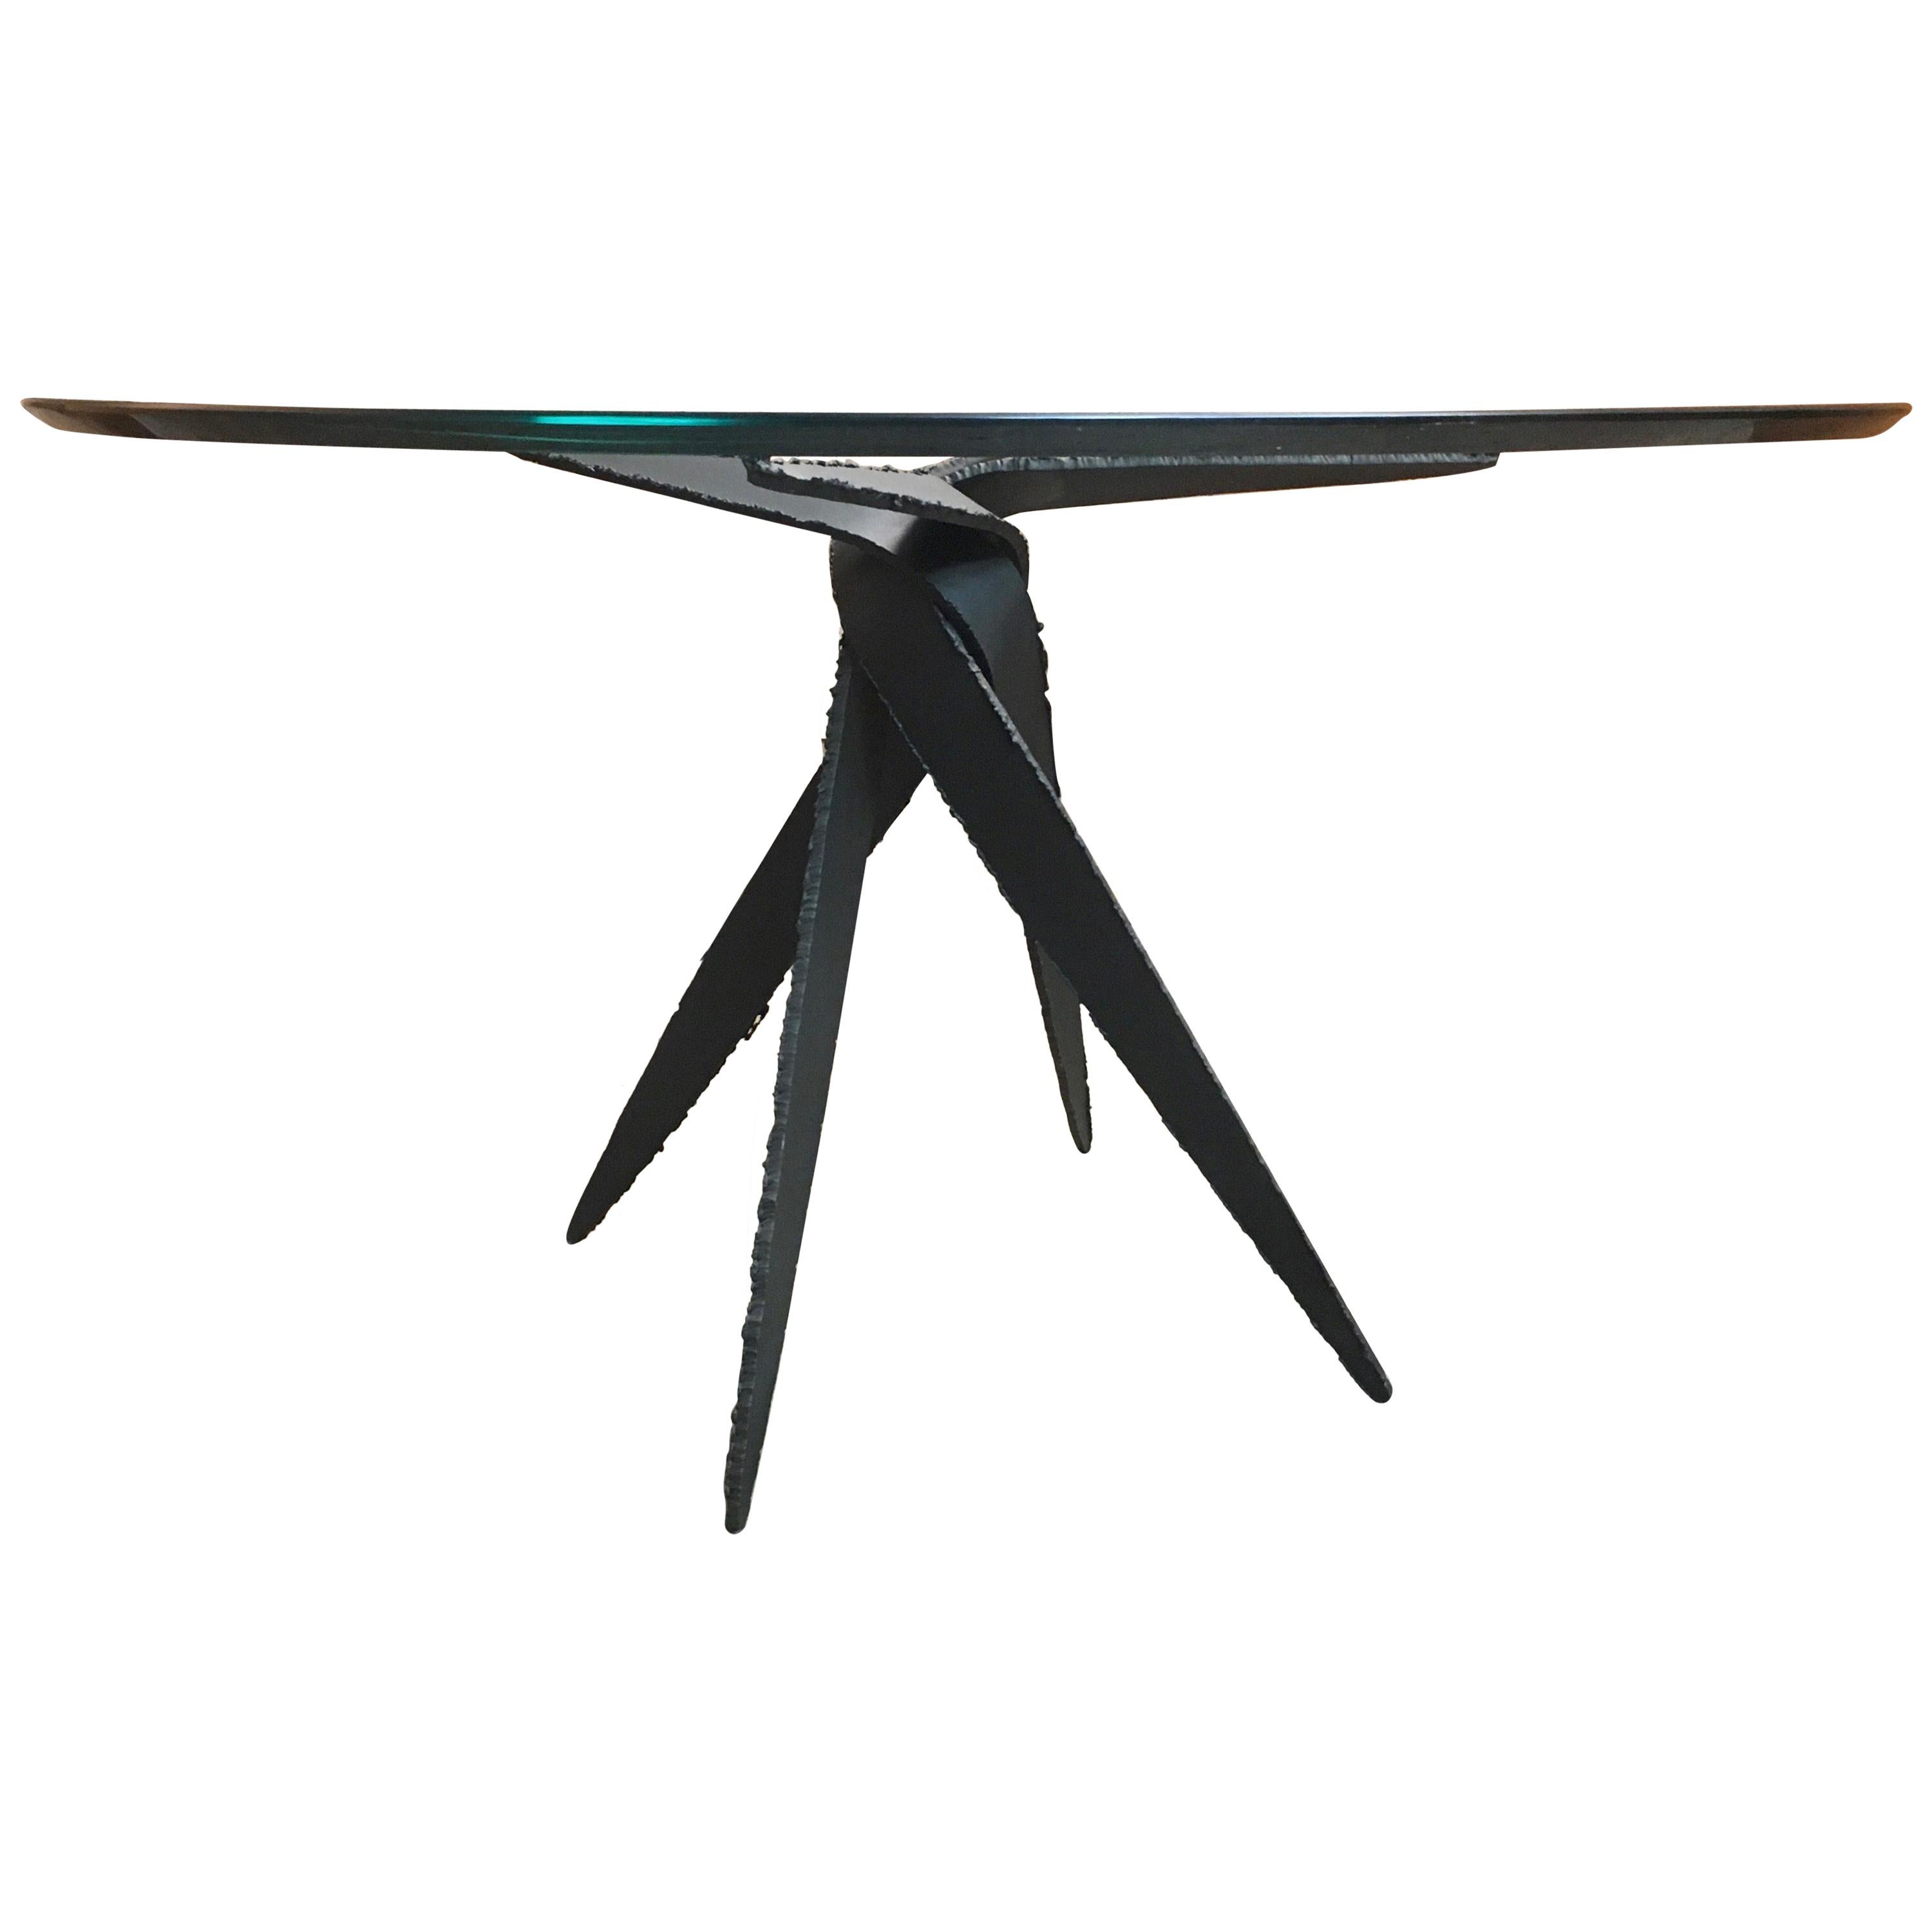 Torch Cut Steel Brutal Dining Table